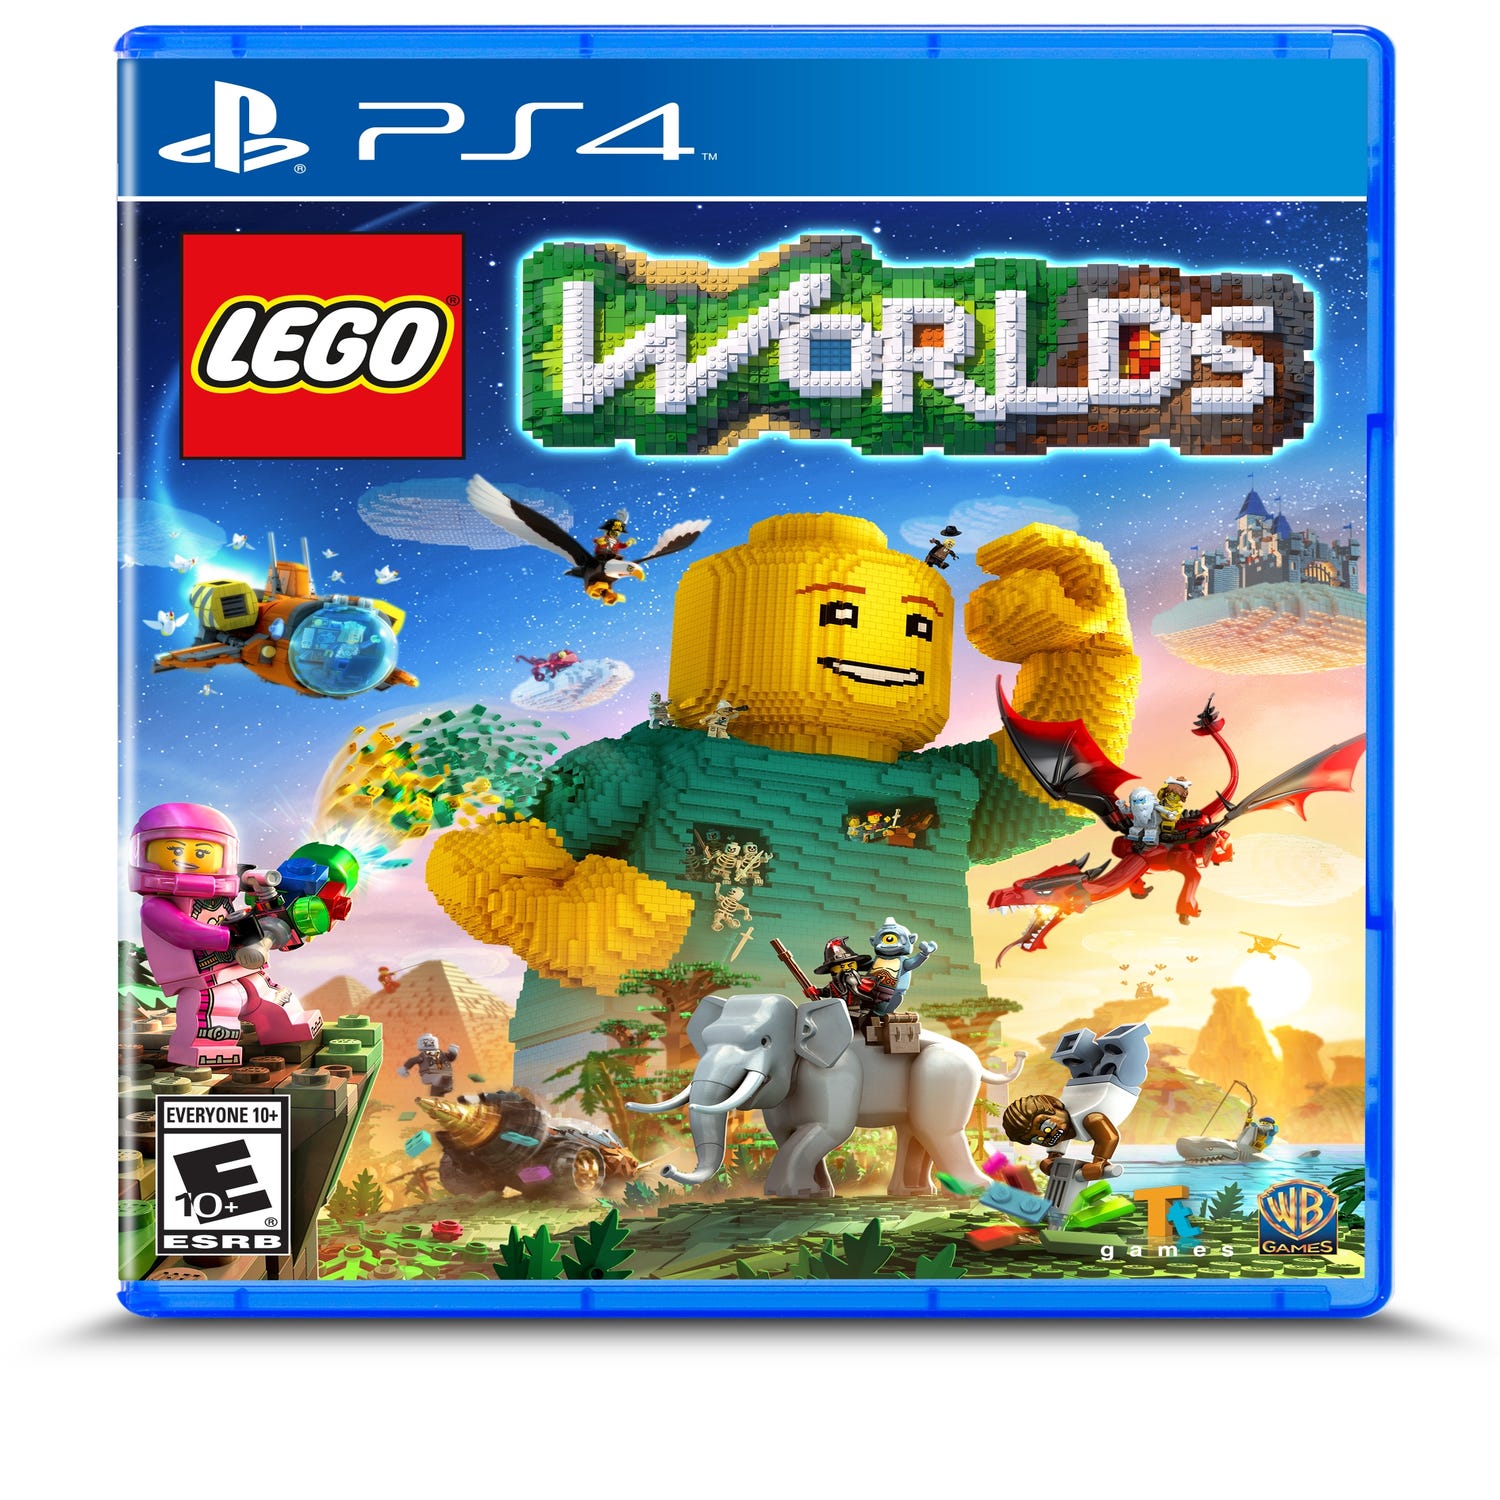 LEGO® Worlds PLAYSTATION® 4 Video Game 5005366 Classic Buy online